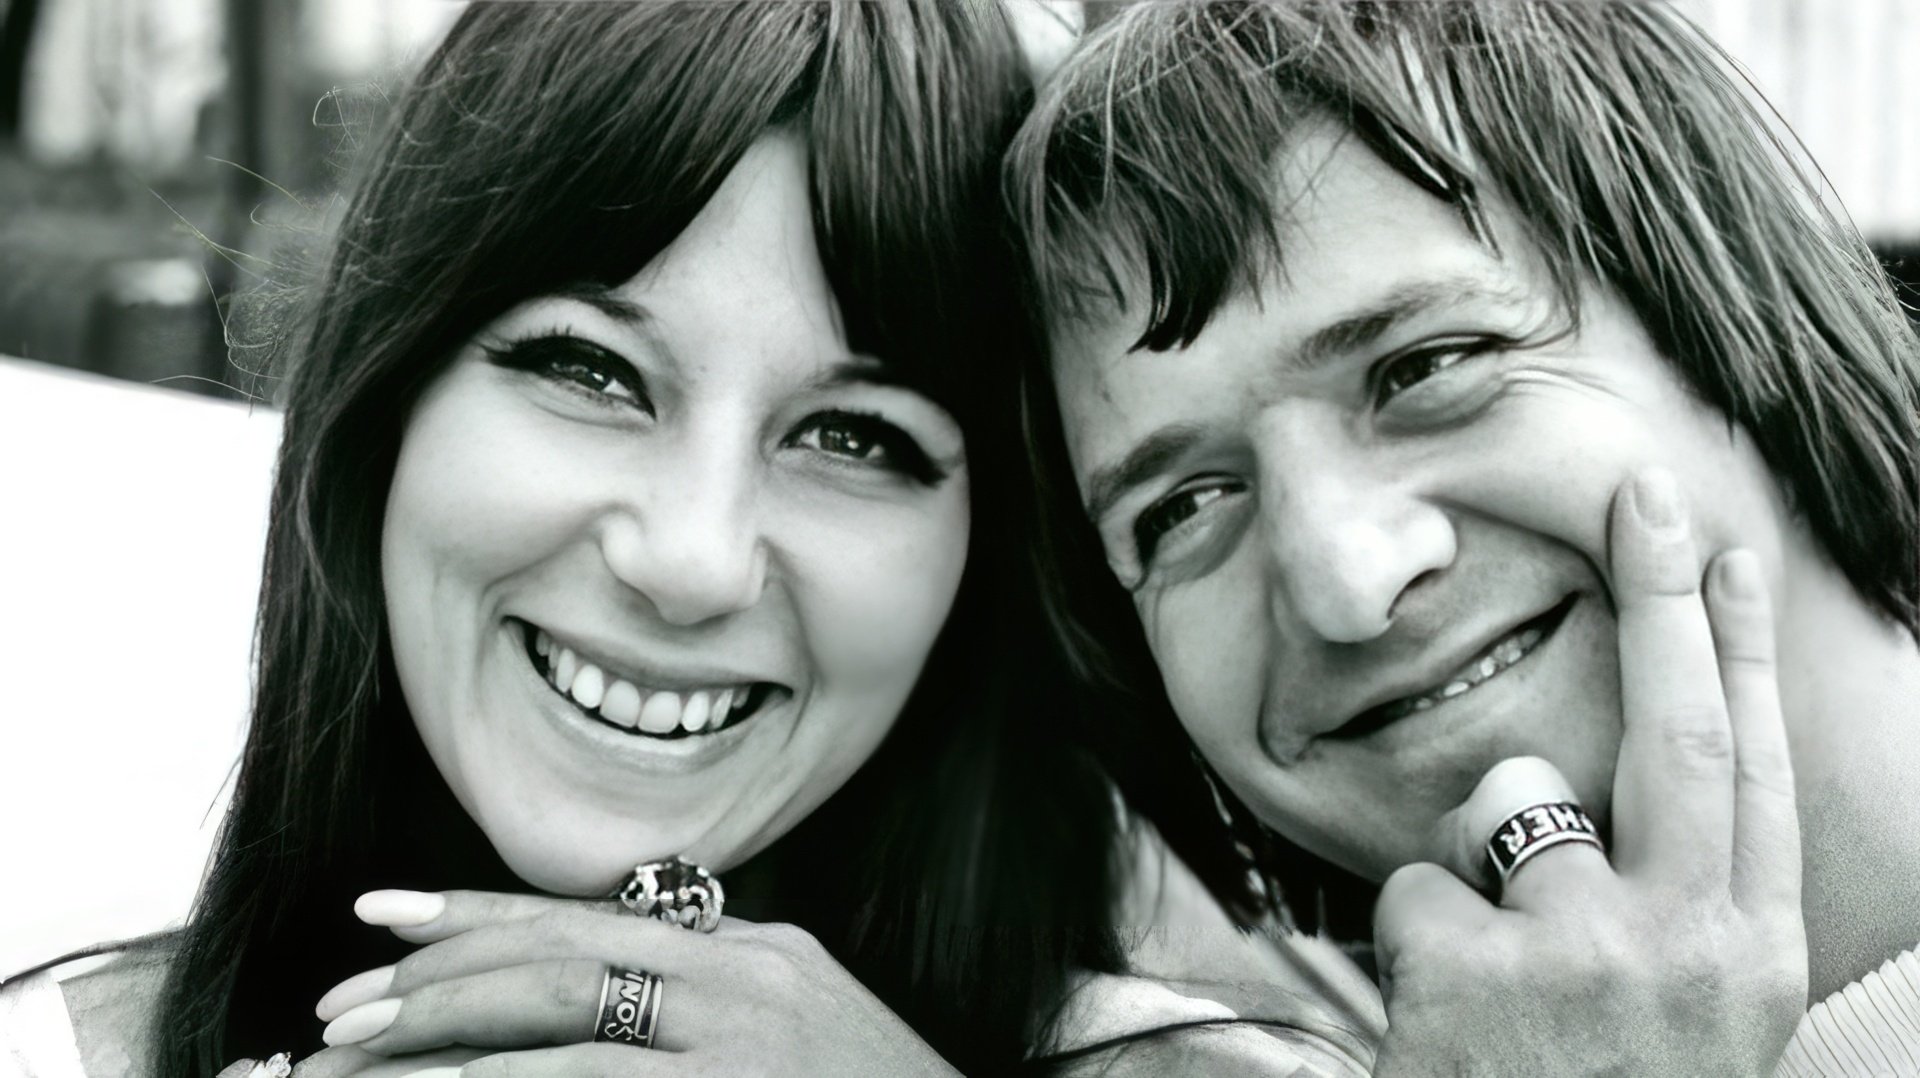 In 1964 Sonny and Cher got married